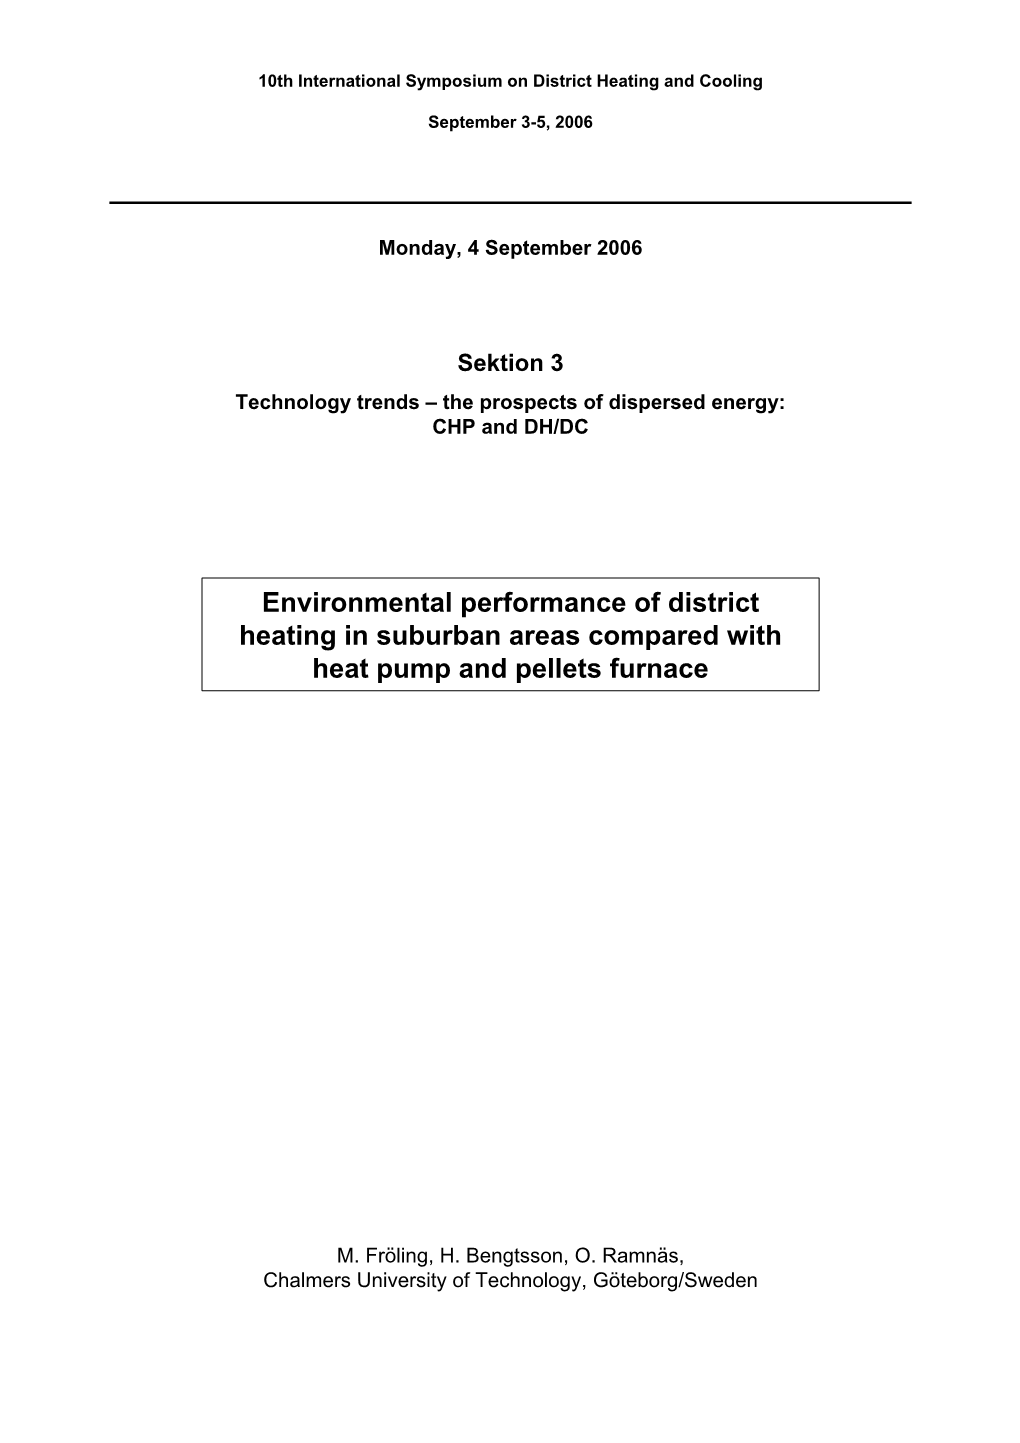 Environmental Performance of District Heating in Suburban Areas Compared with Heat Pump and Pellets Furnace